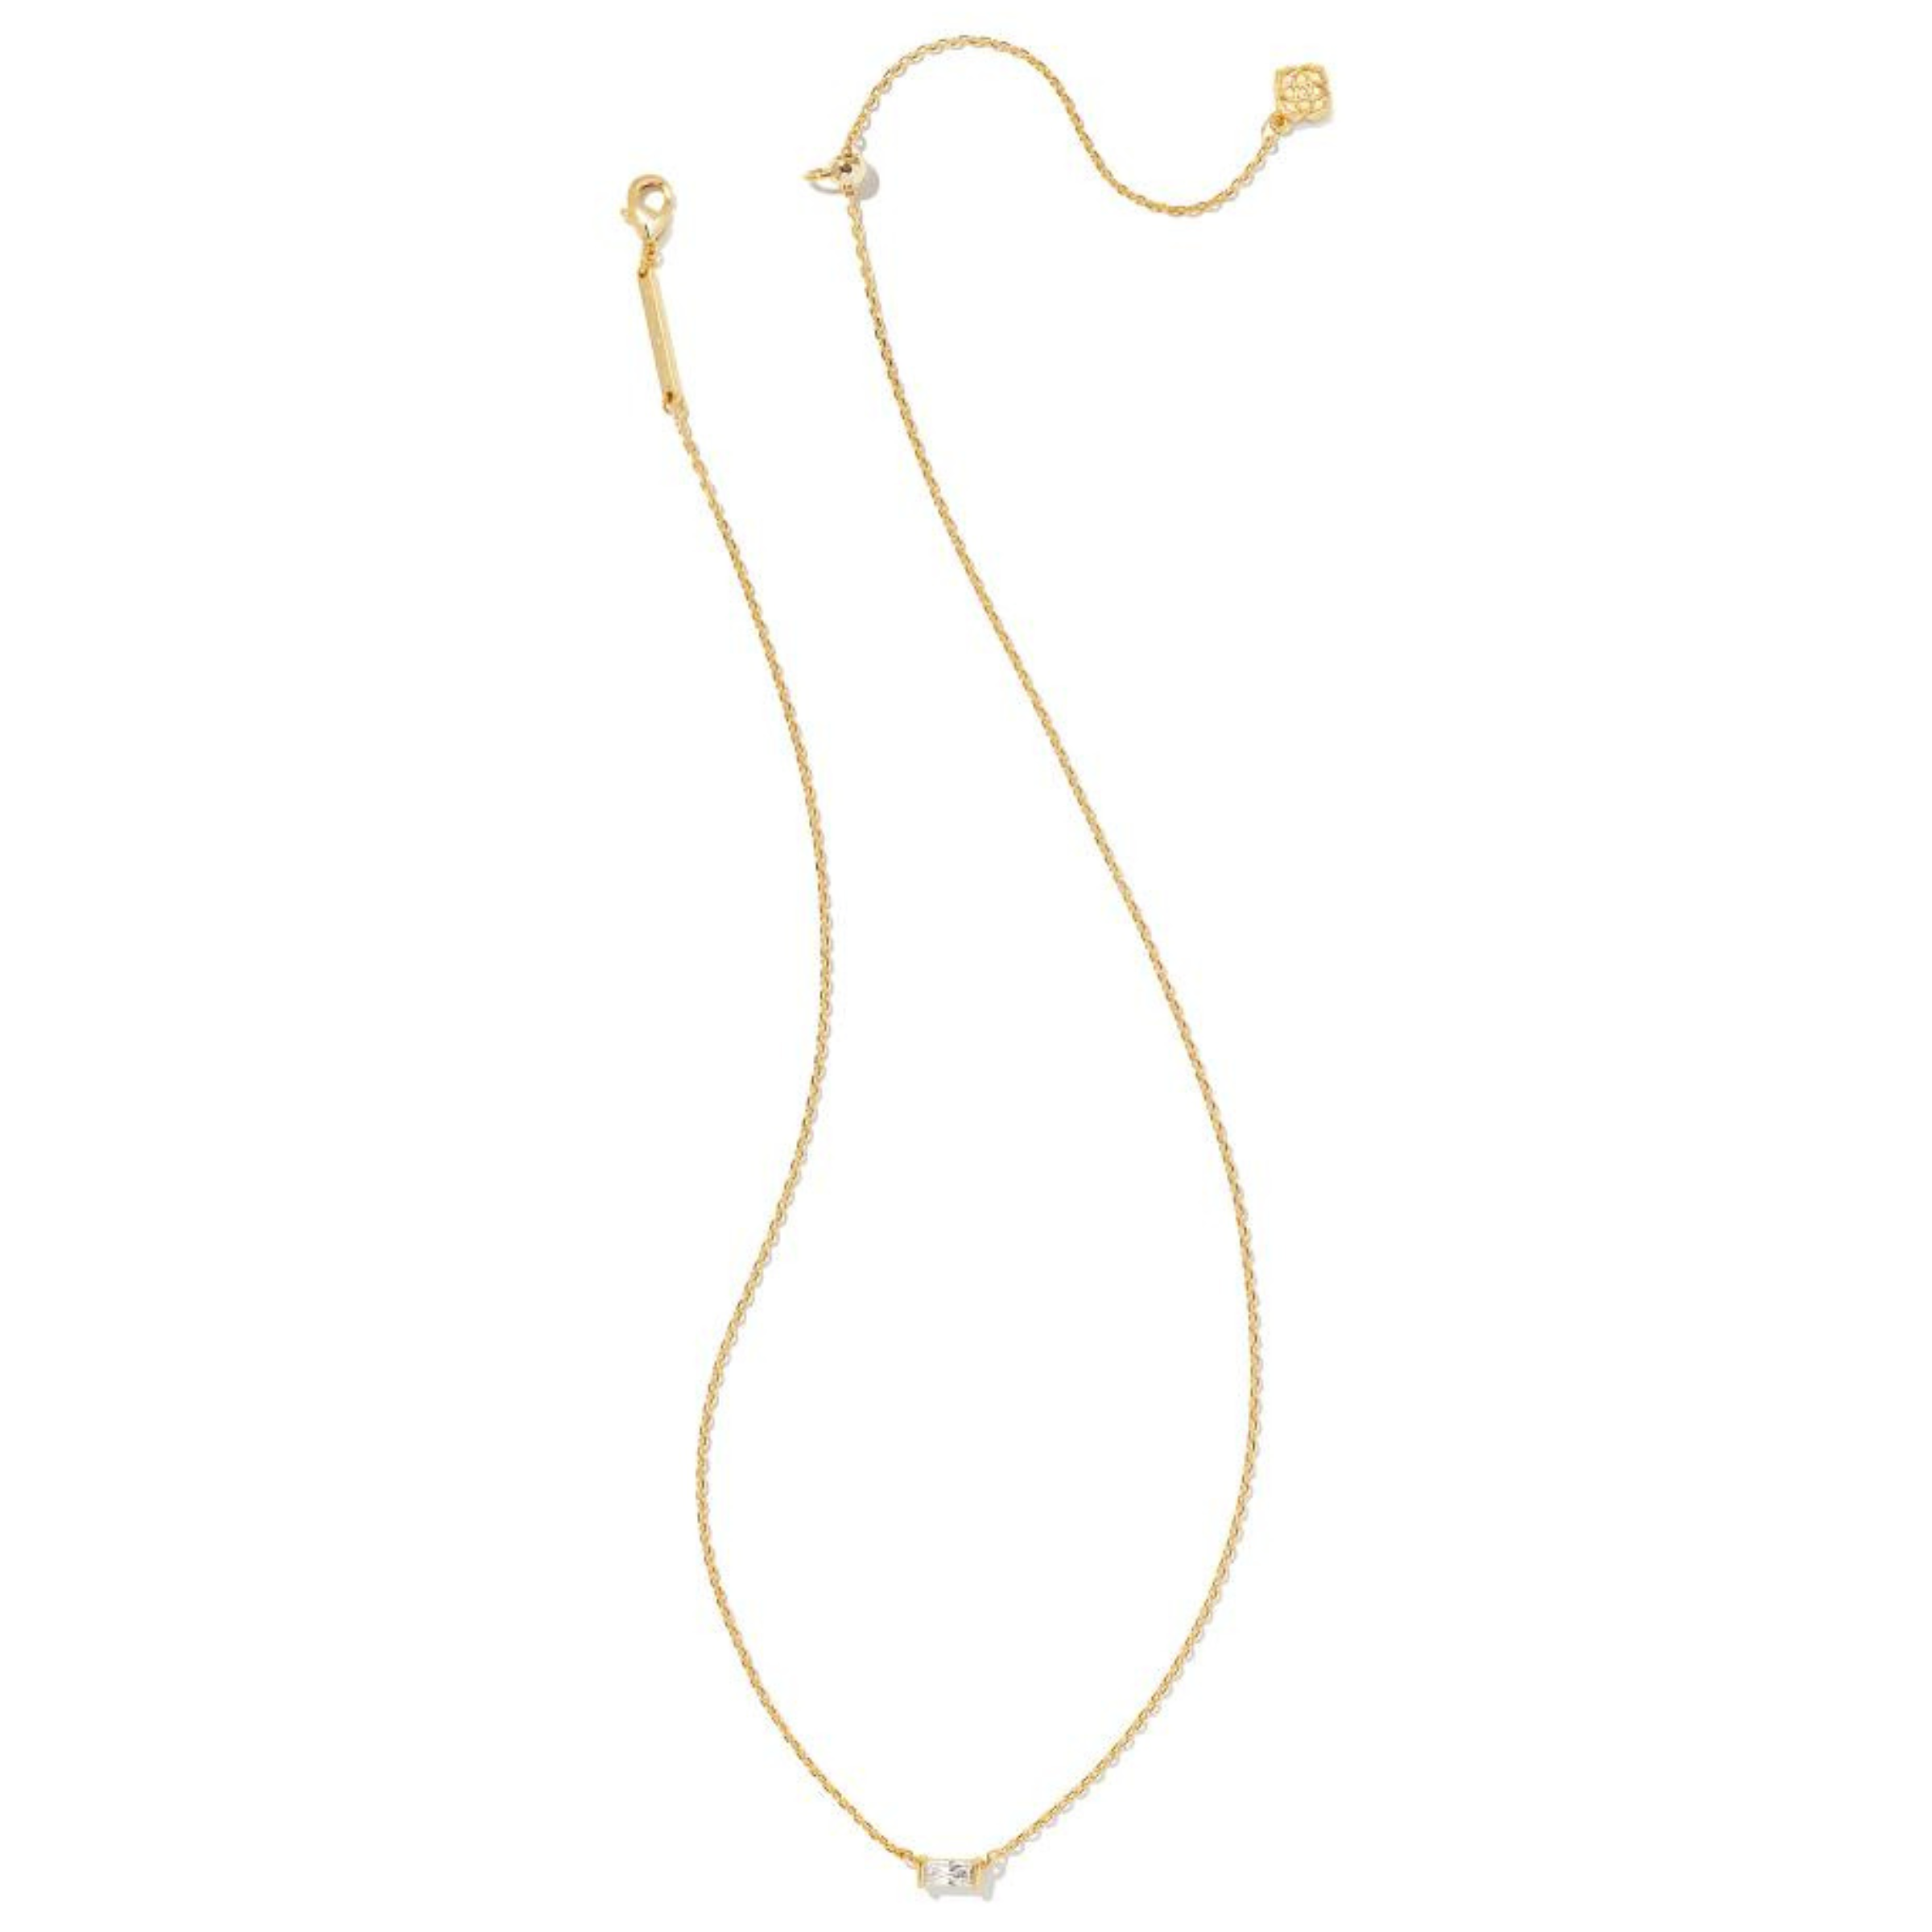 Kendra Scott | Juliette Gold Pendant Necklace in White Crystal - Giddy Up Glamour Boutique